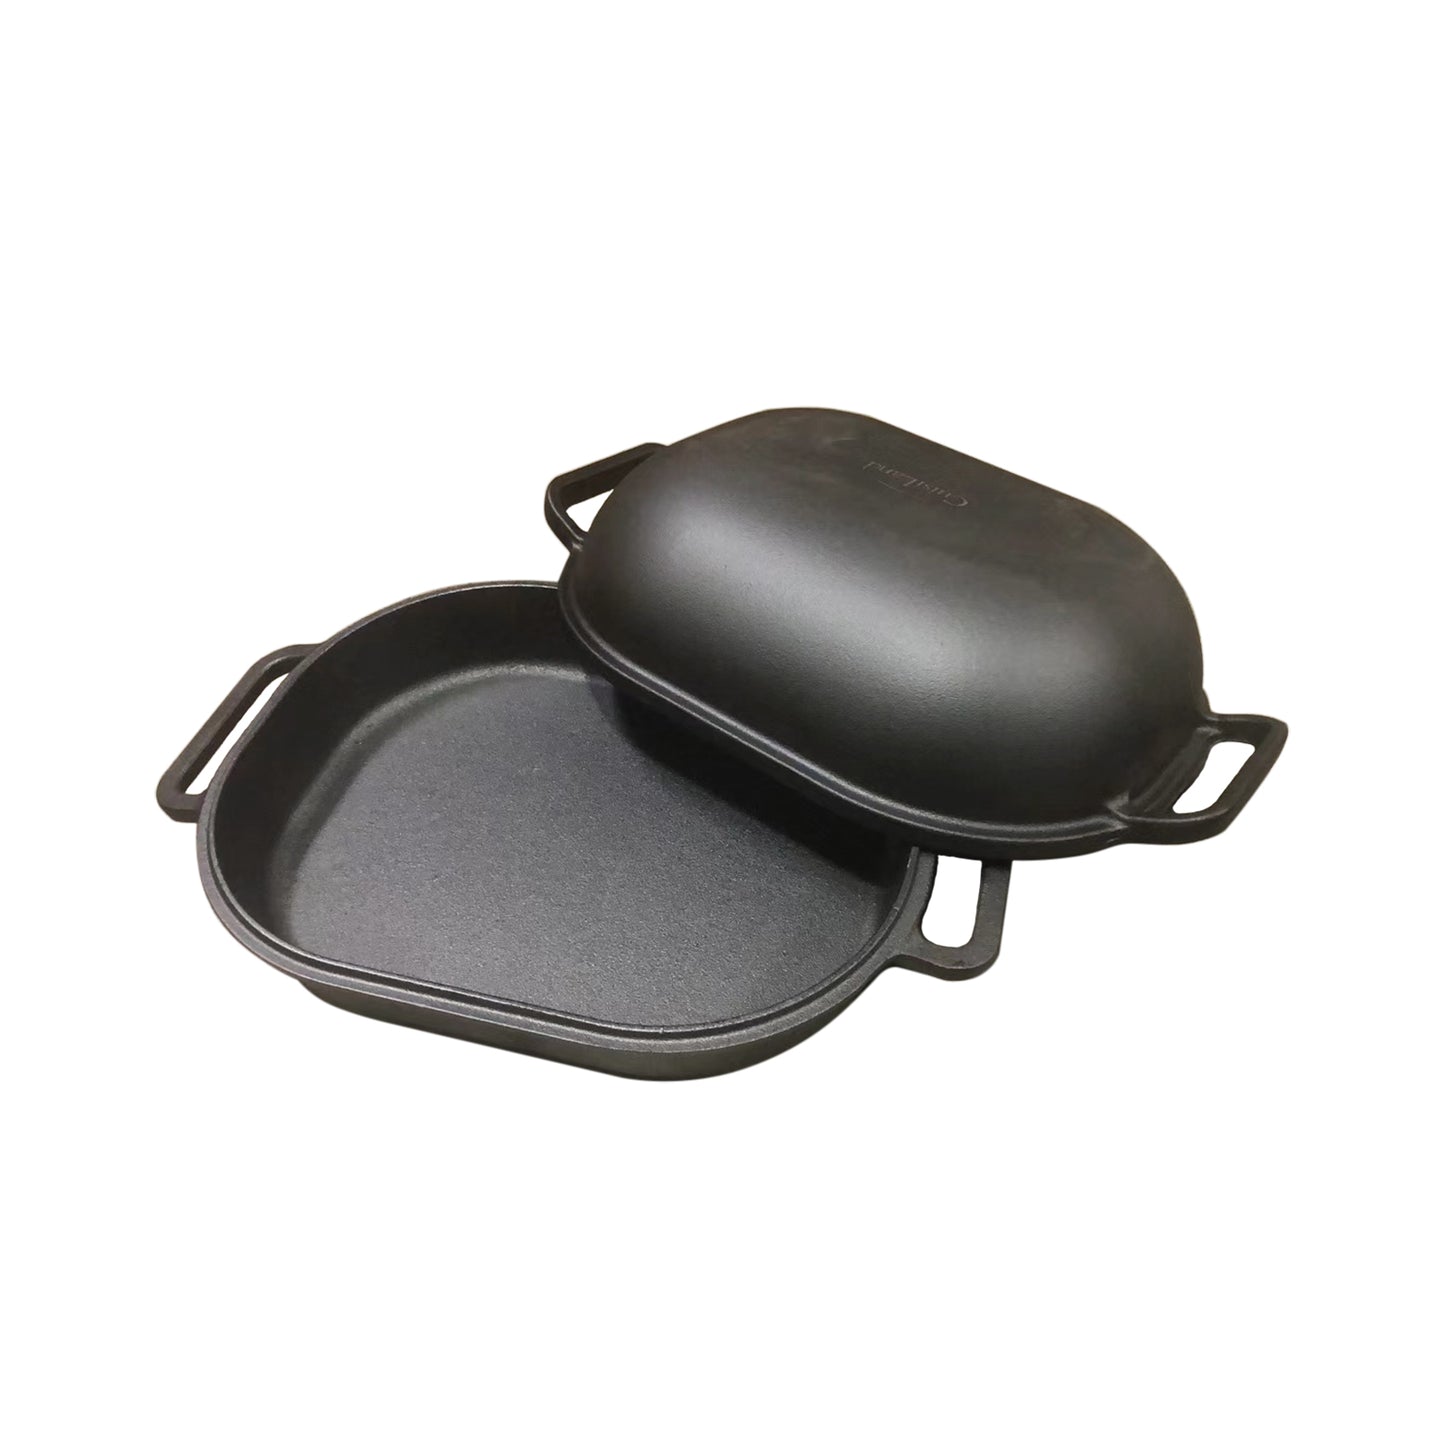 Base Pan for Cuisiland Large Heavy Duty Cast Iron Bread & Loaf Pan